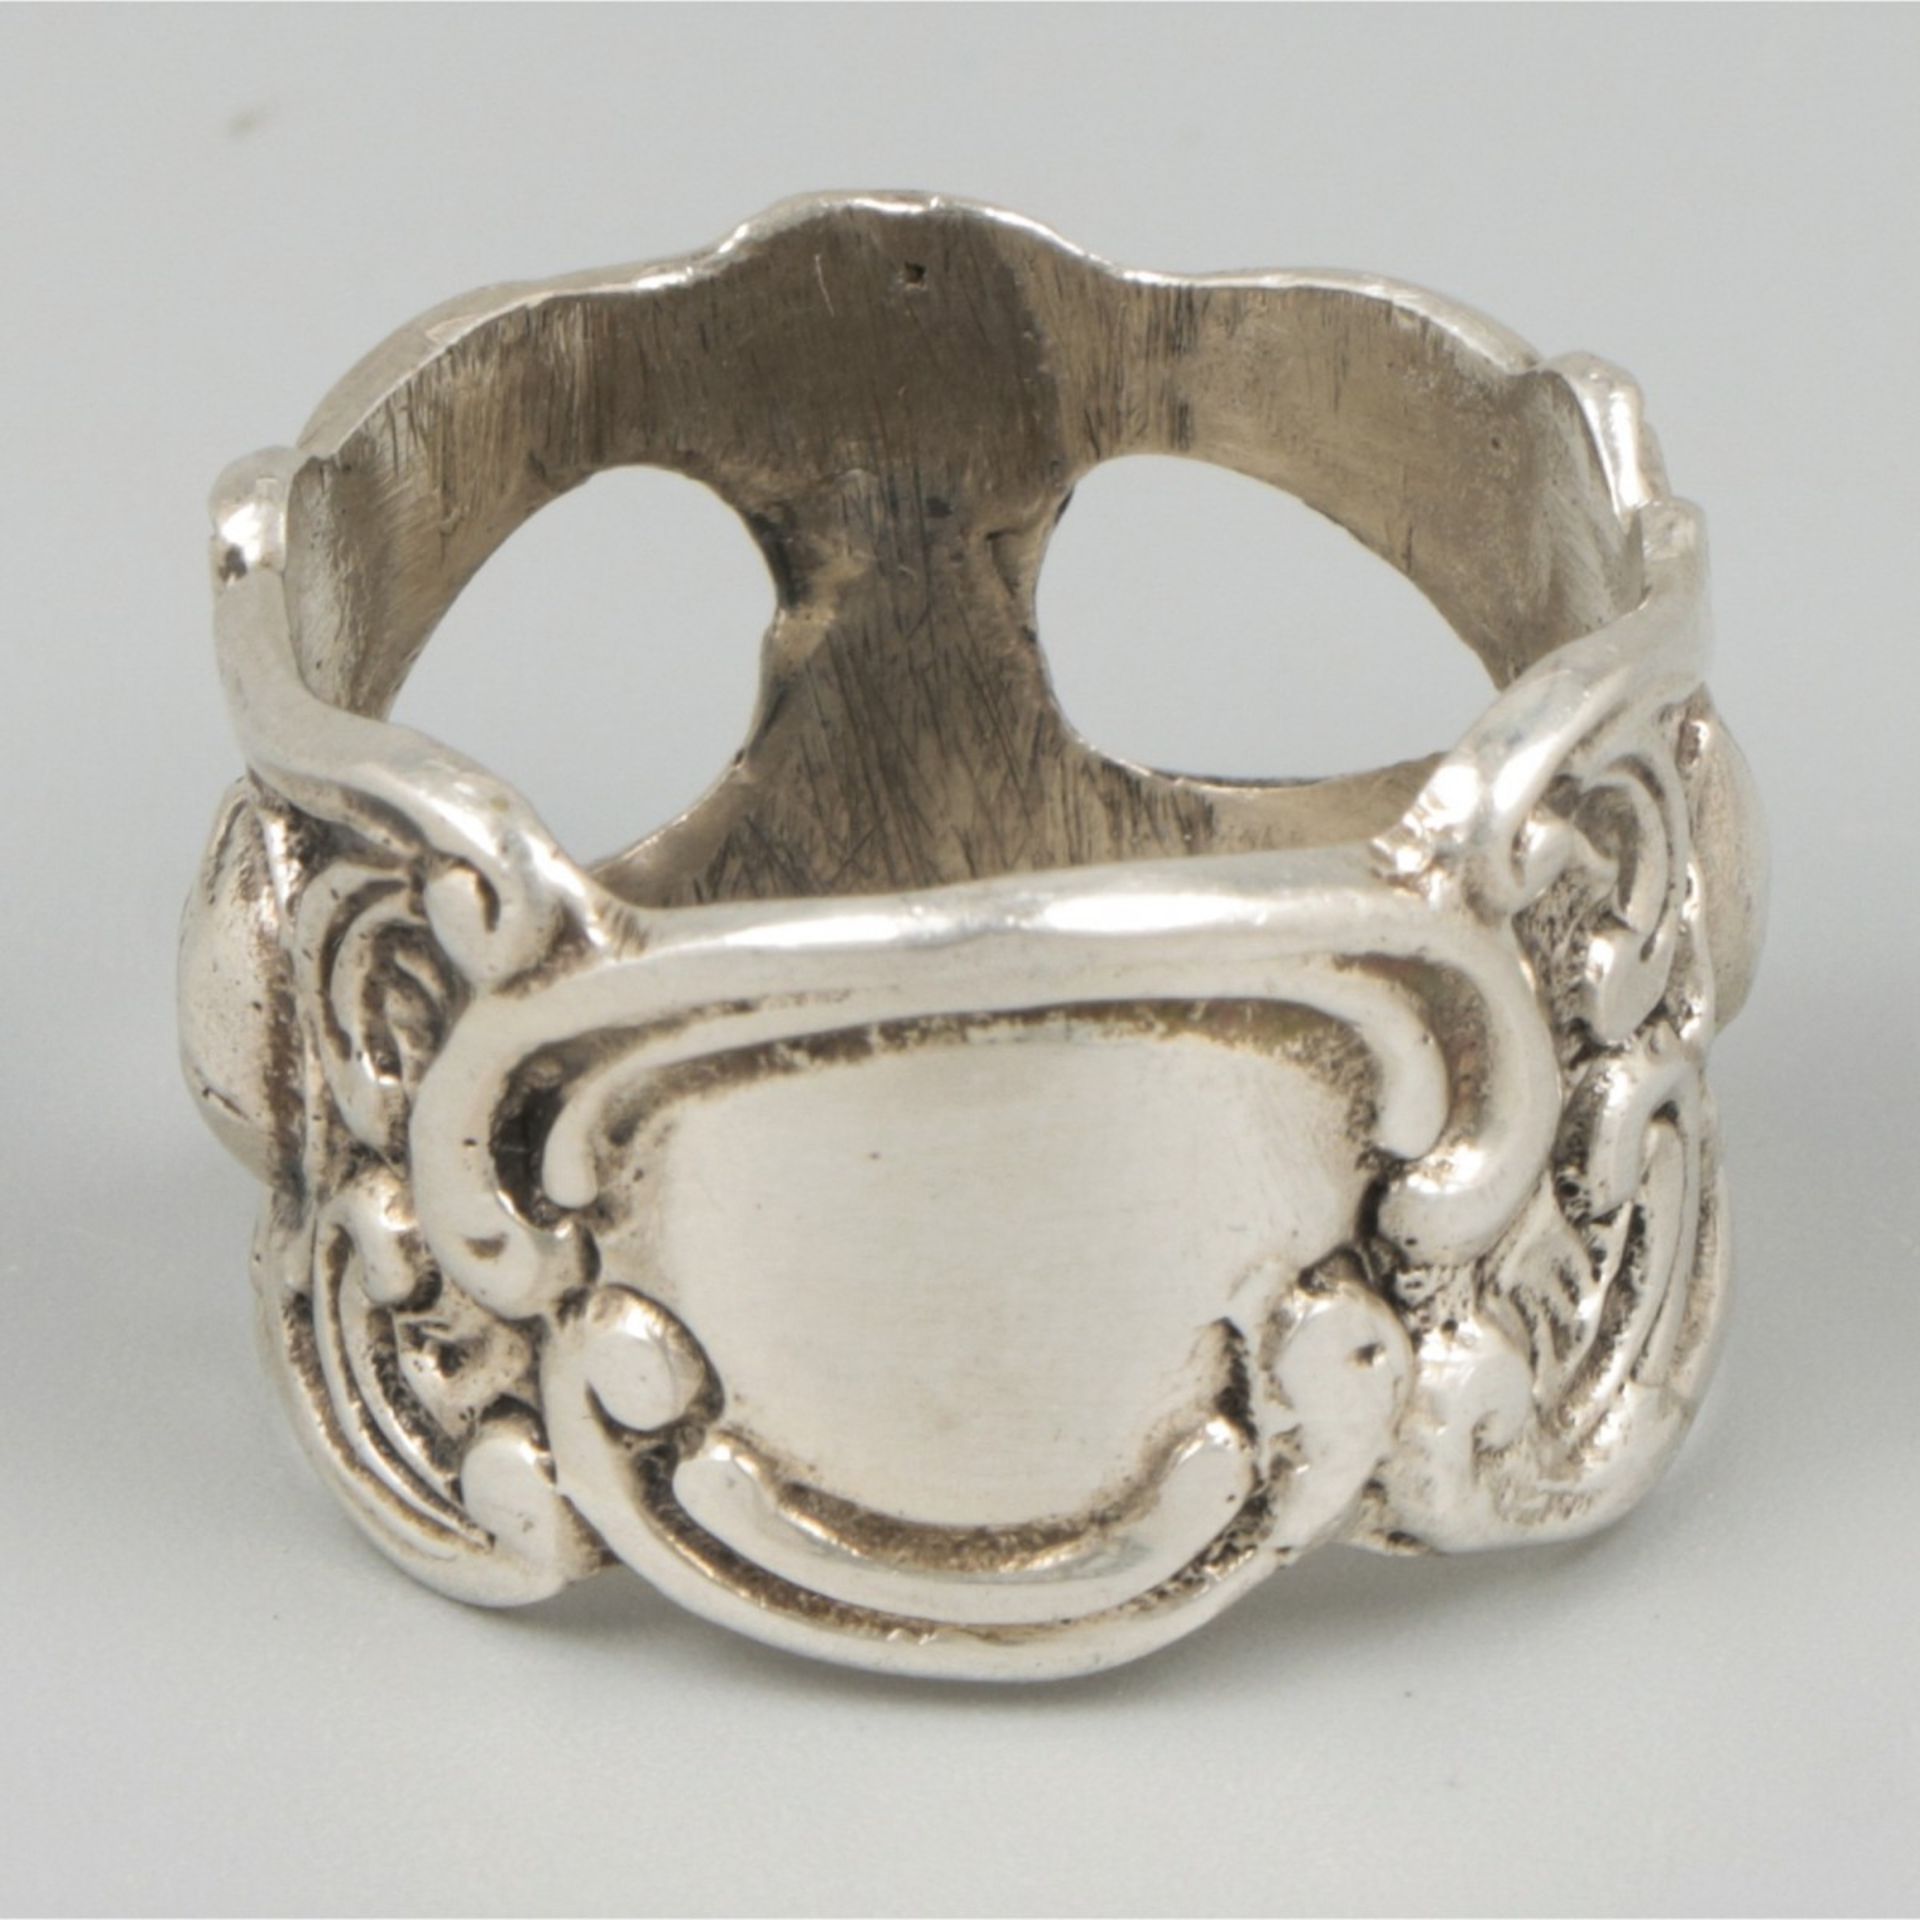 10-piece set of silver finger cloth rings. - Image 2 of 5